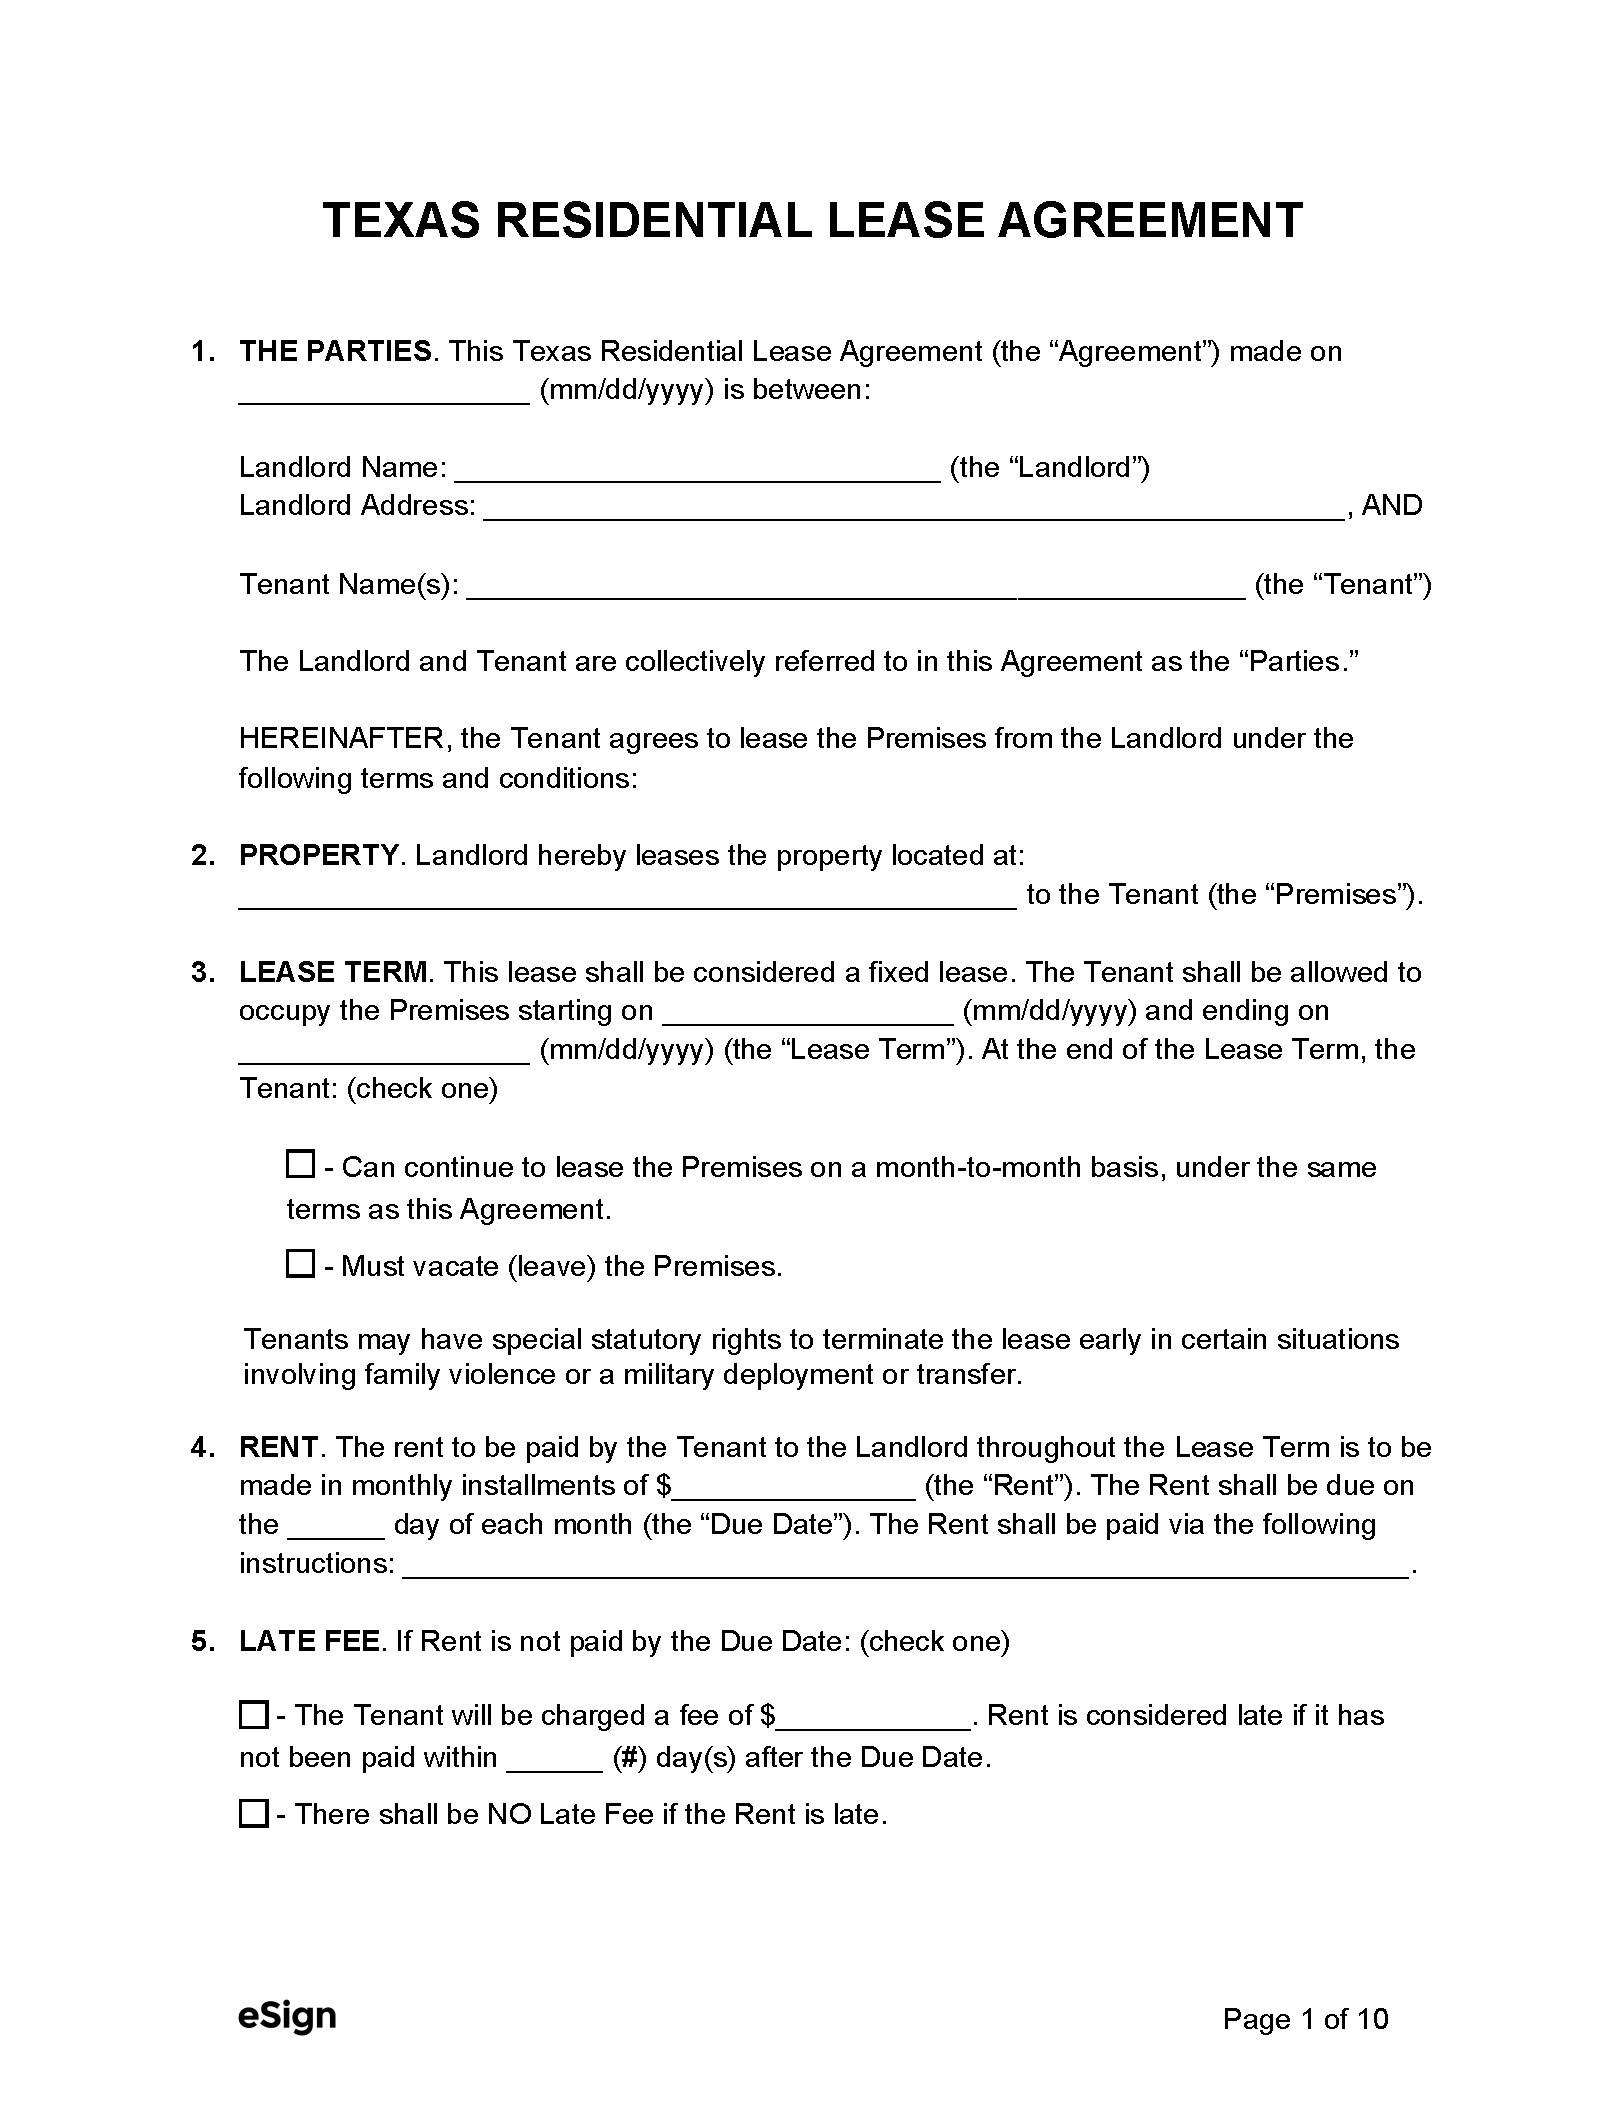 Texas Association Of Realtors Residential Lease Agreement Fillable Form